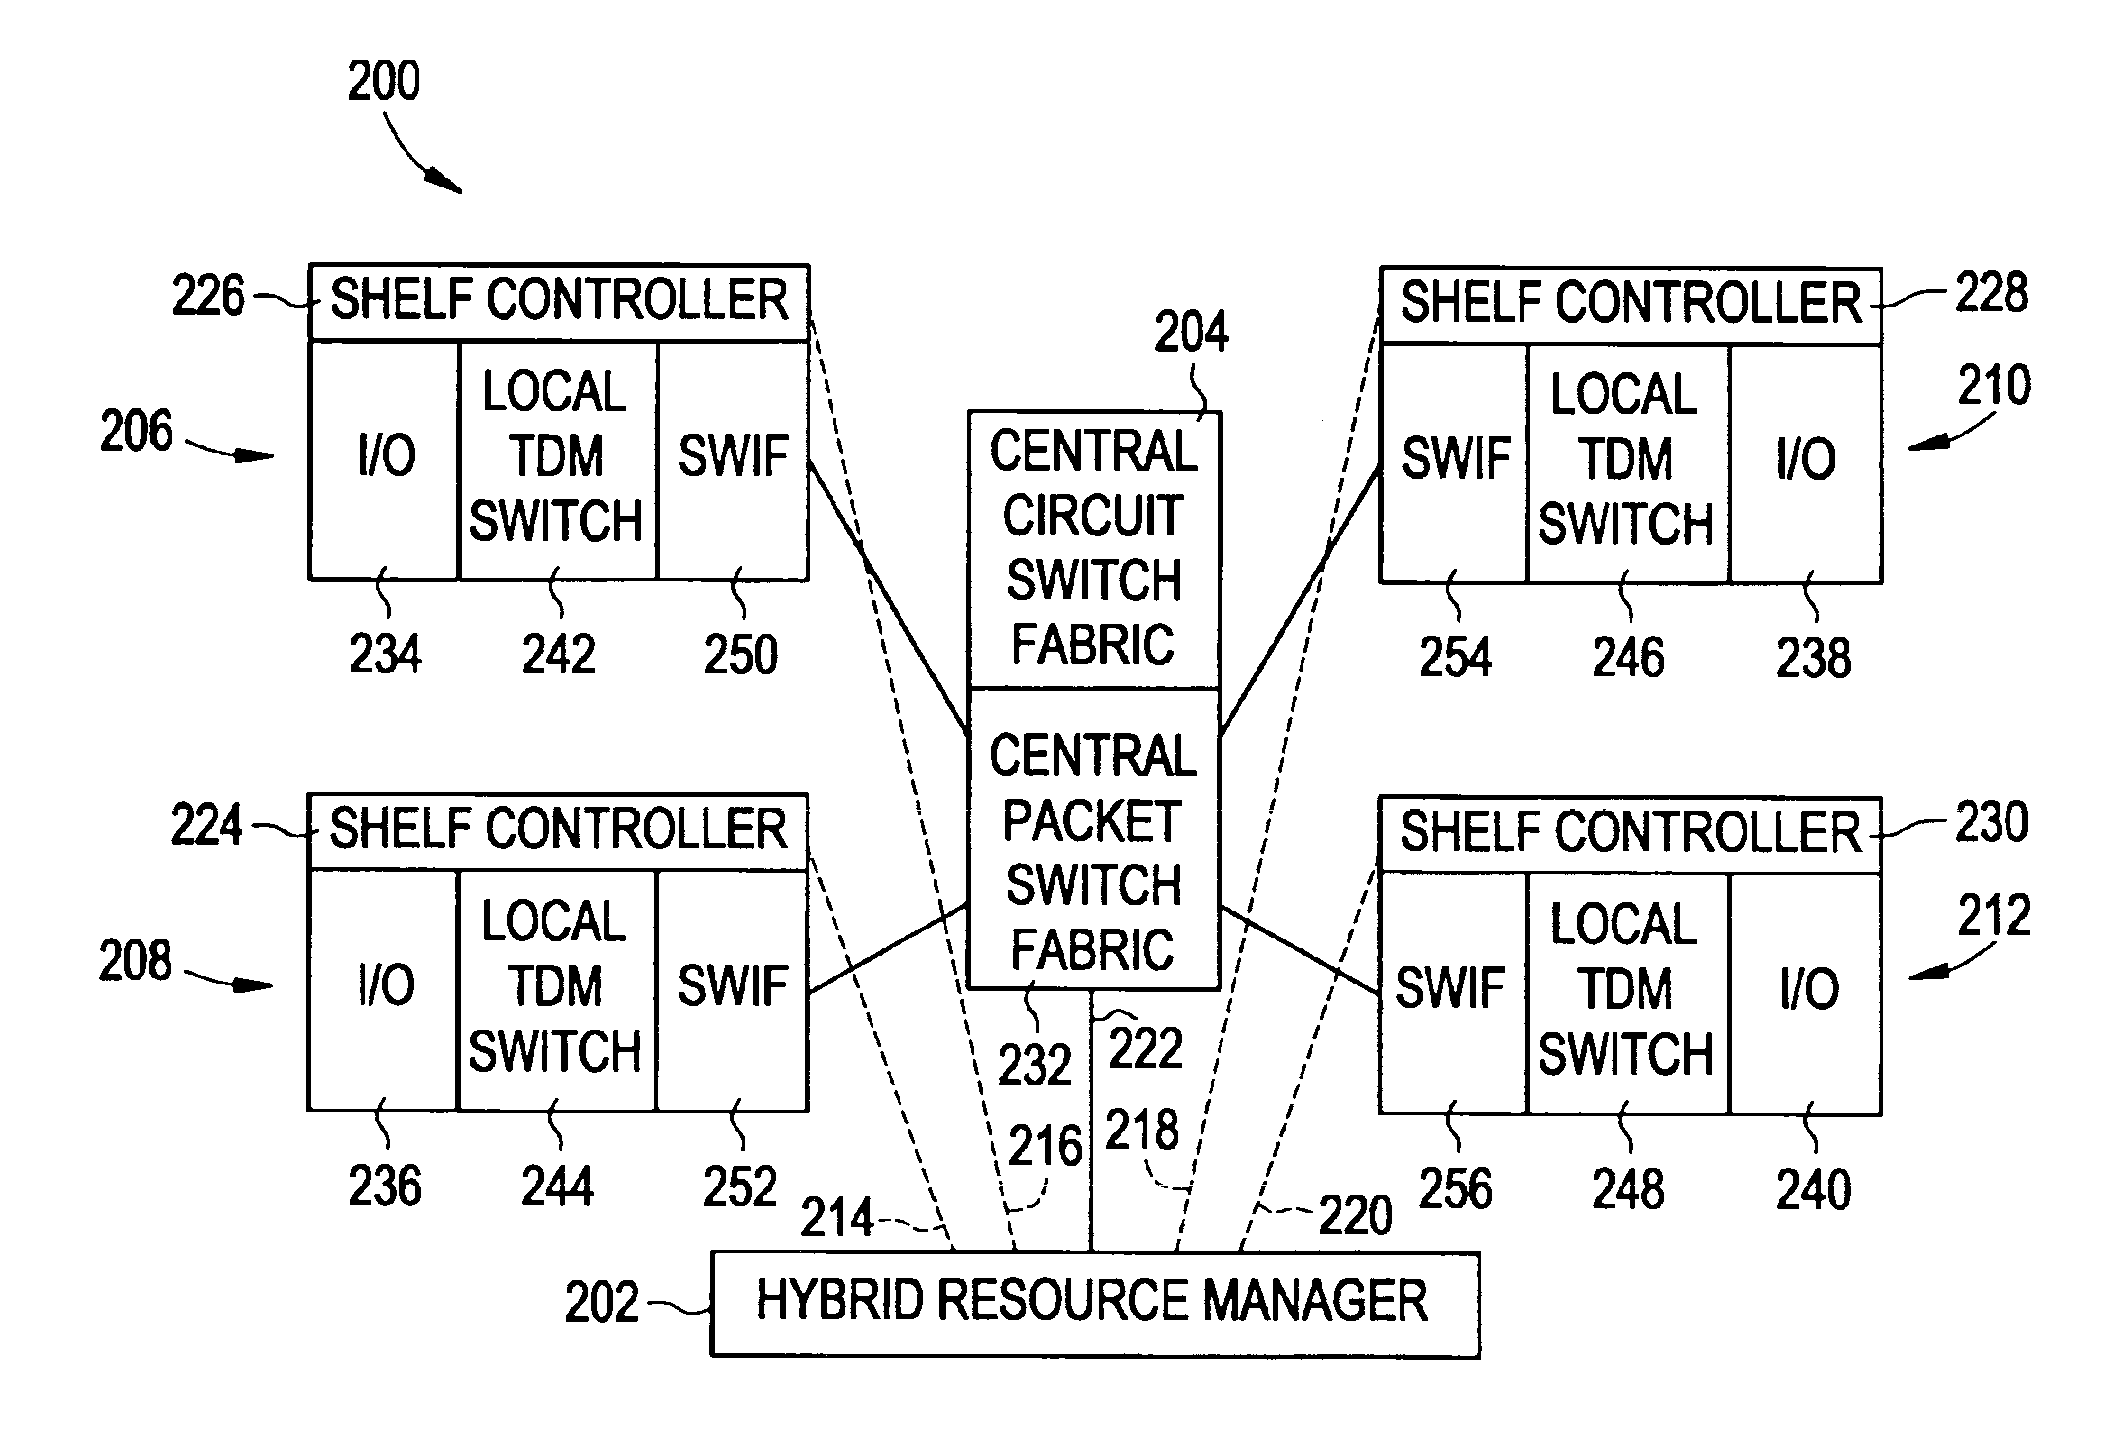 Apparatus and method for synchronous and asynchronous transfer mode switching of ATM traffic